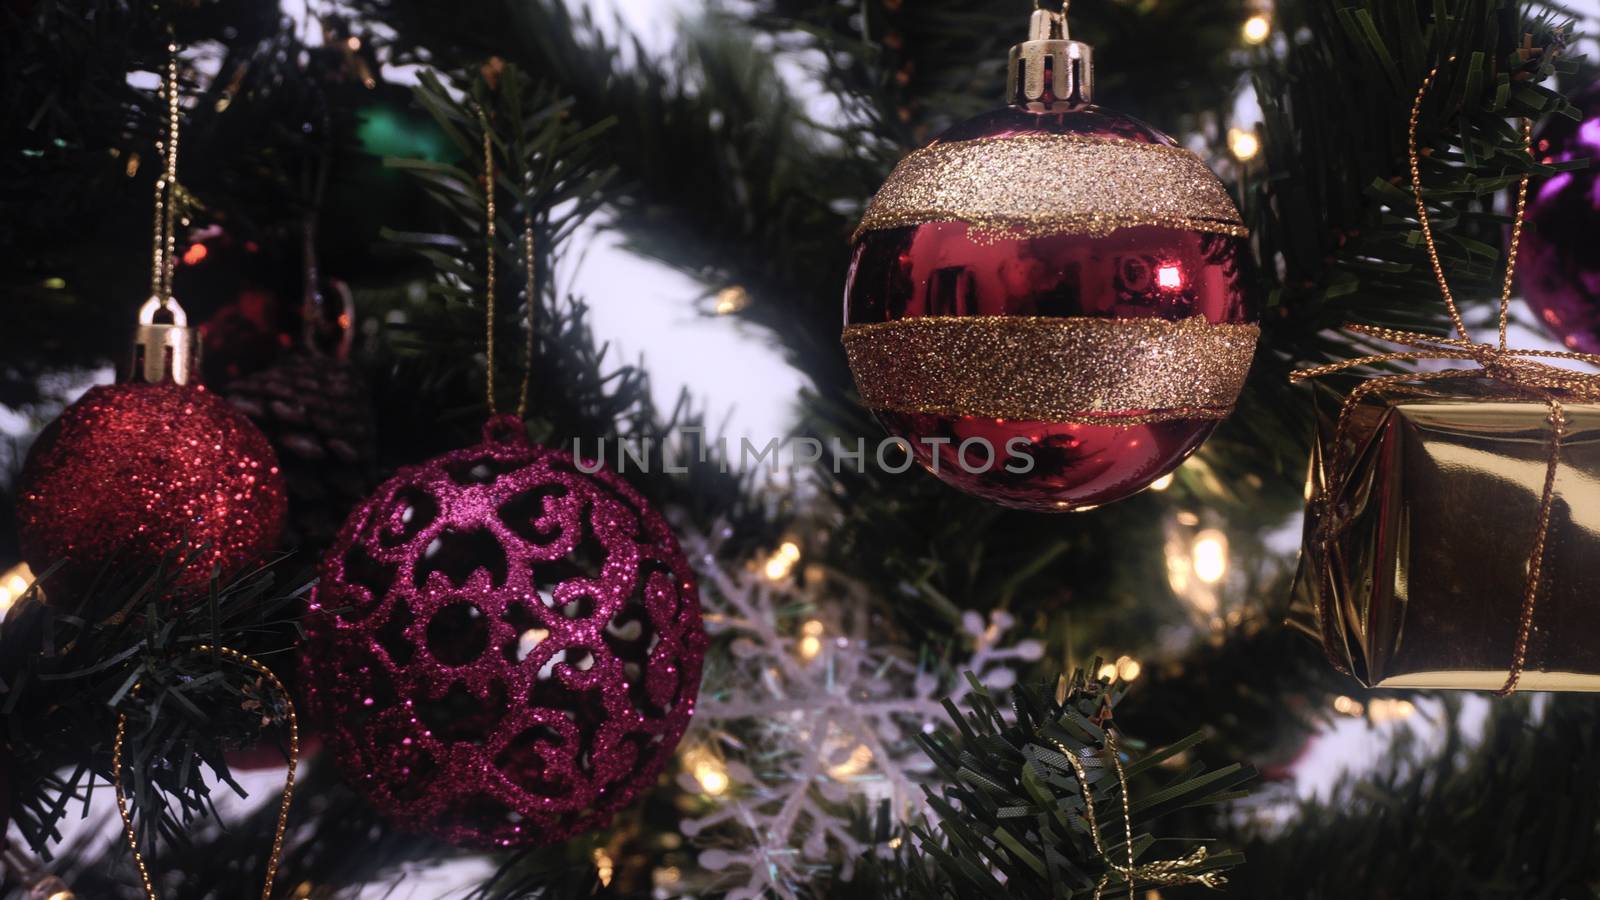 Greeting Season concept.close up of ornaments on a Christmas tree with decorative light